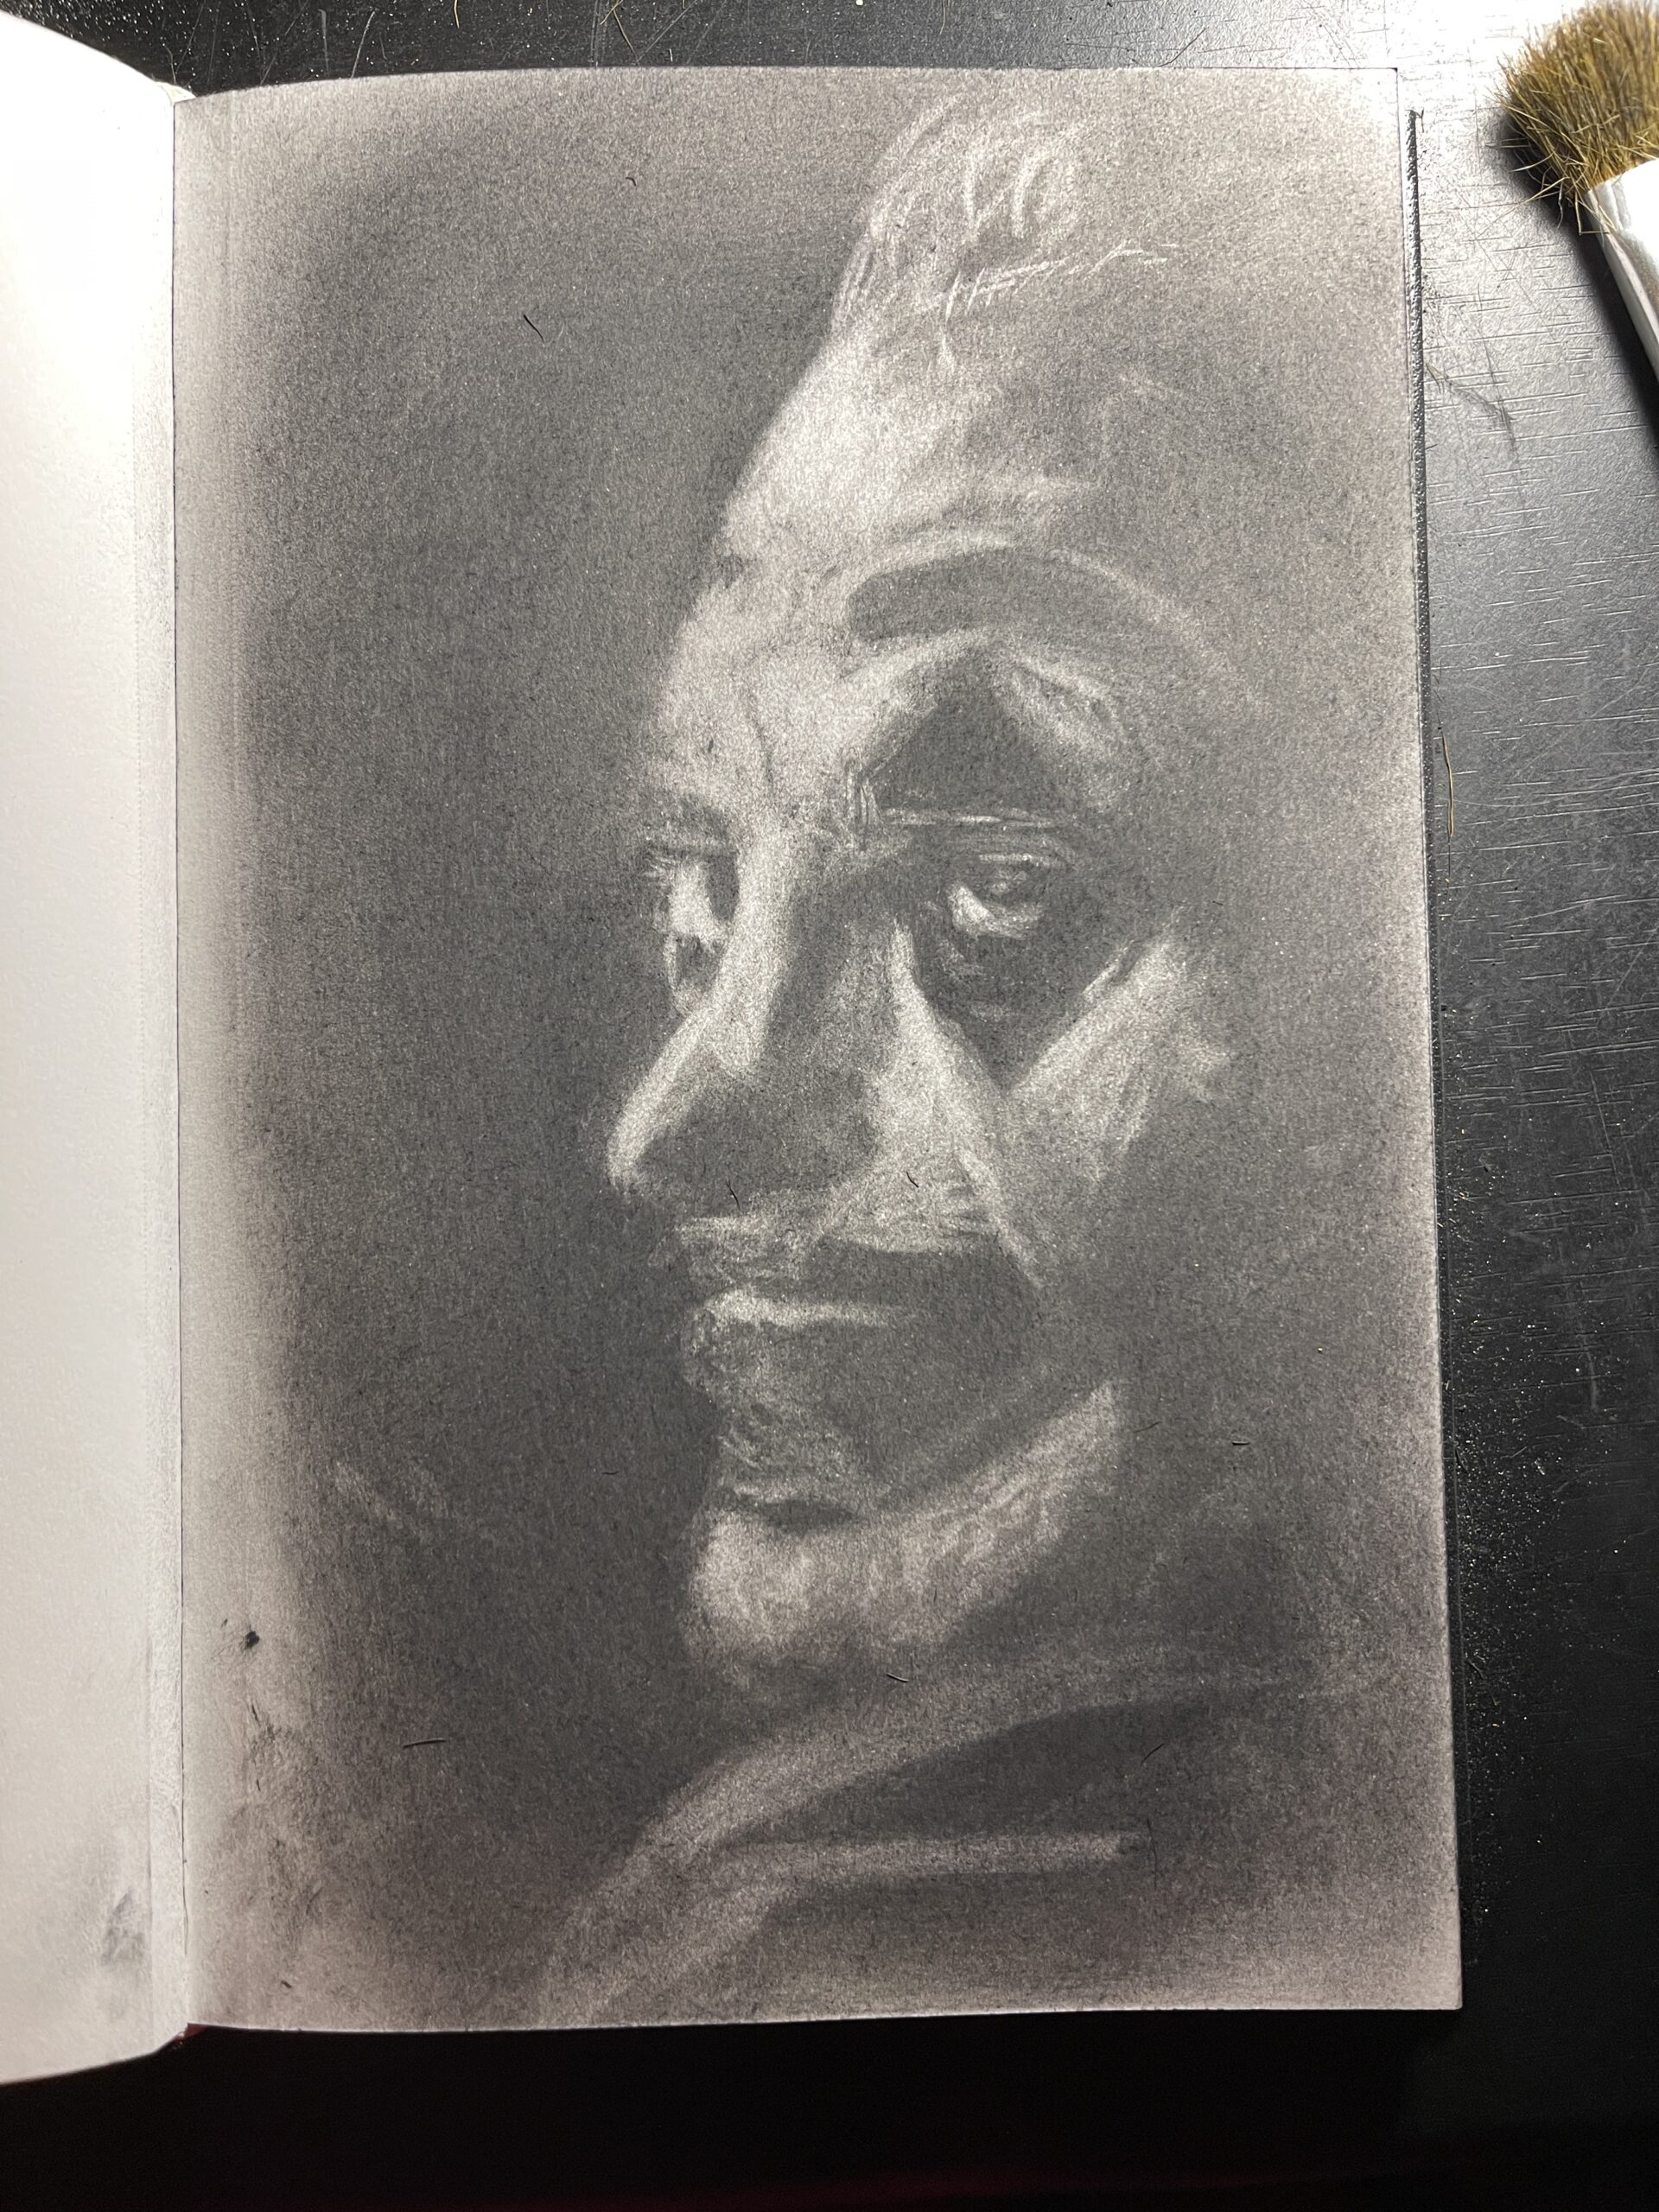 Drawing Backwards with an Eraser: Charcoal Techniques